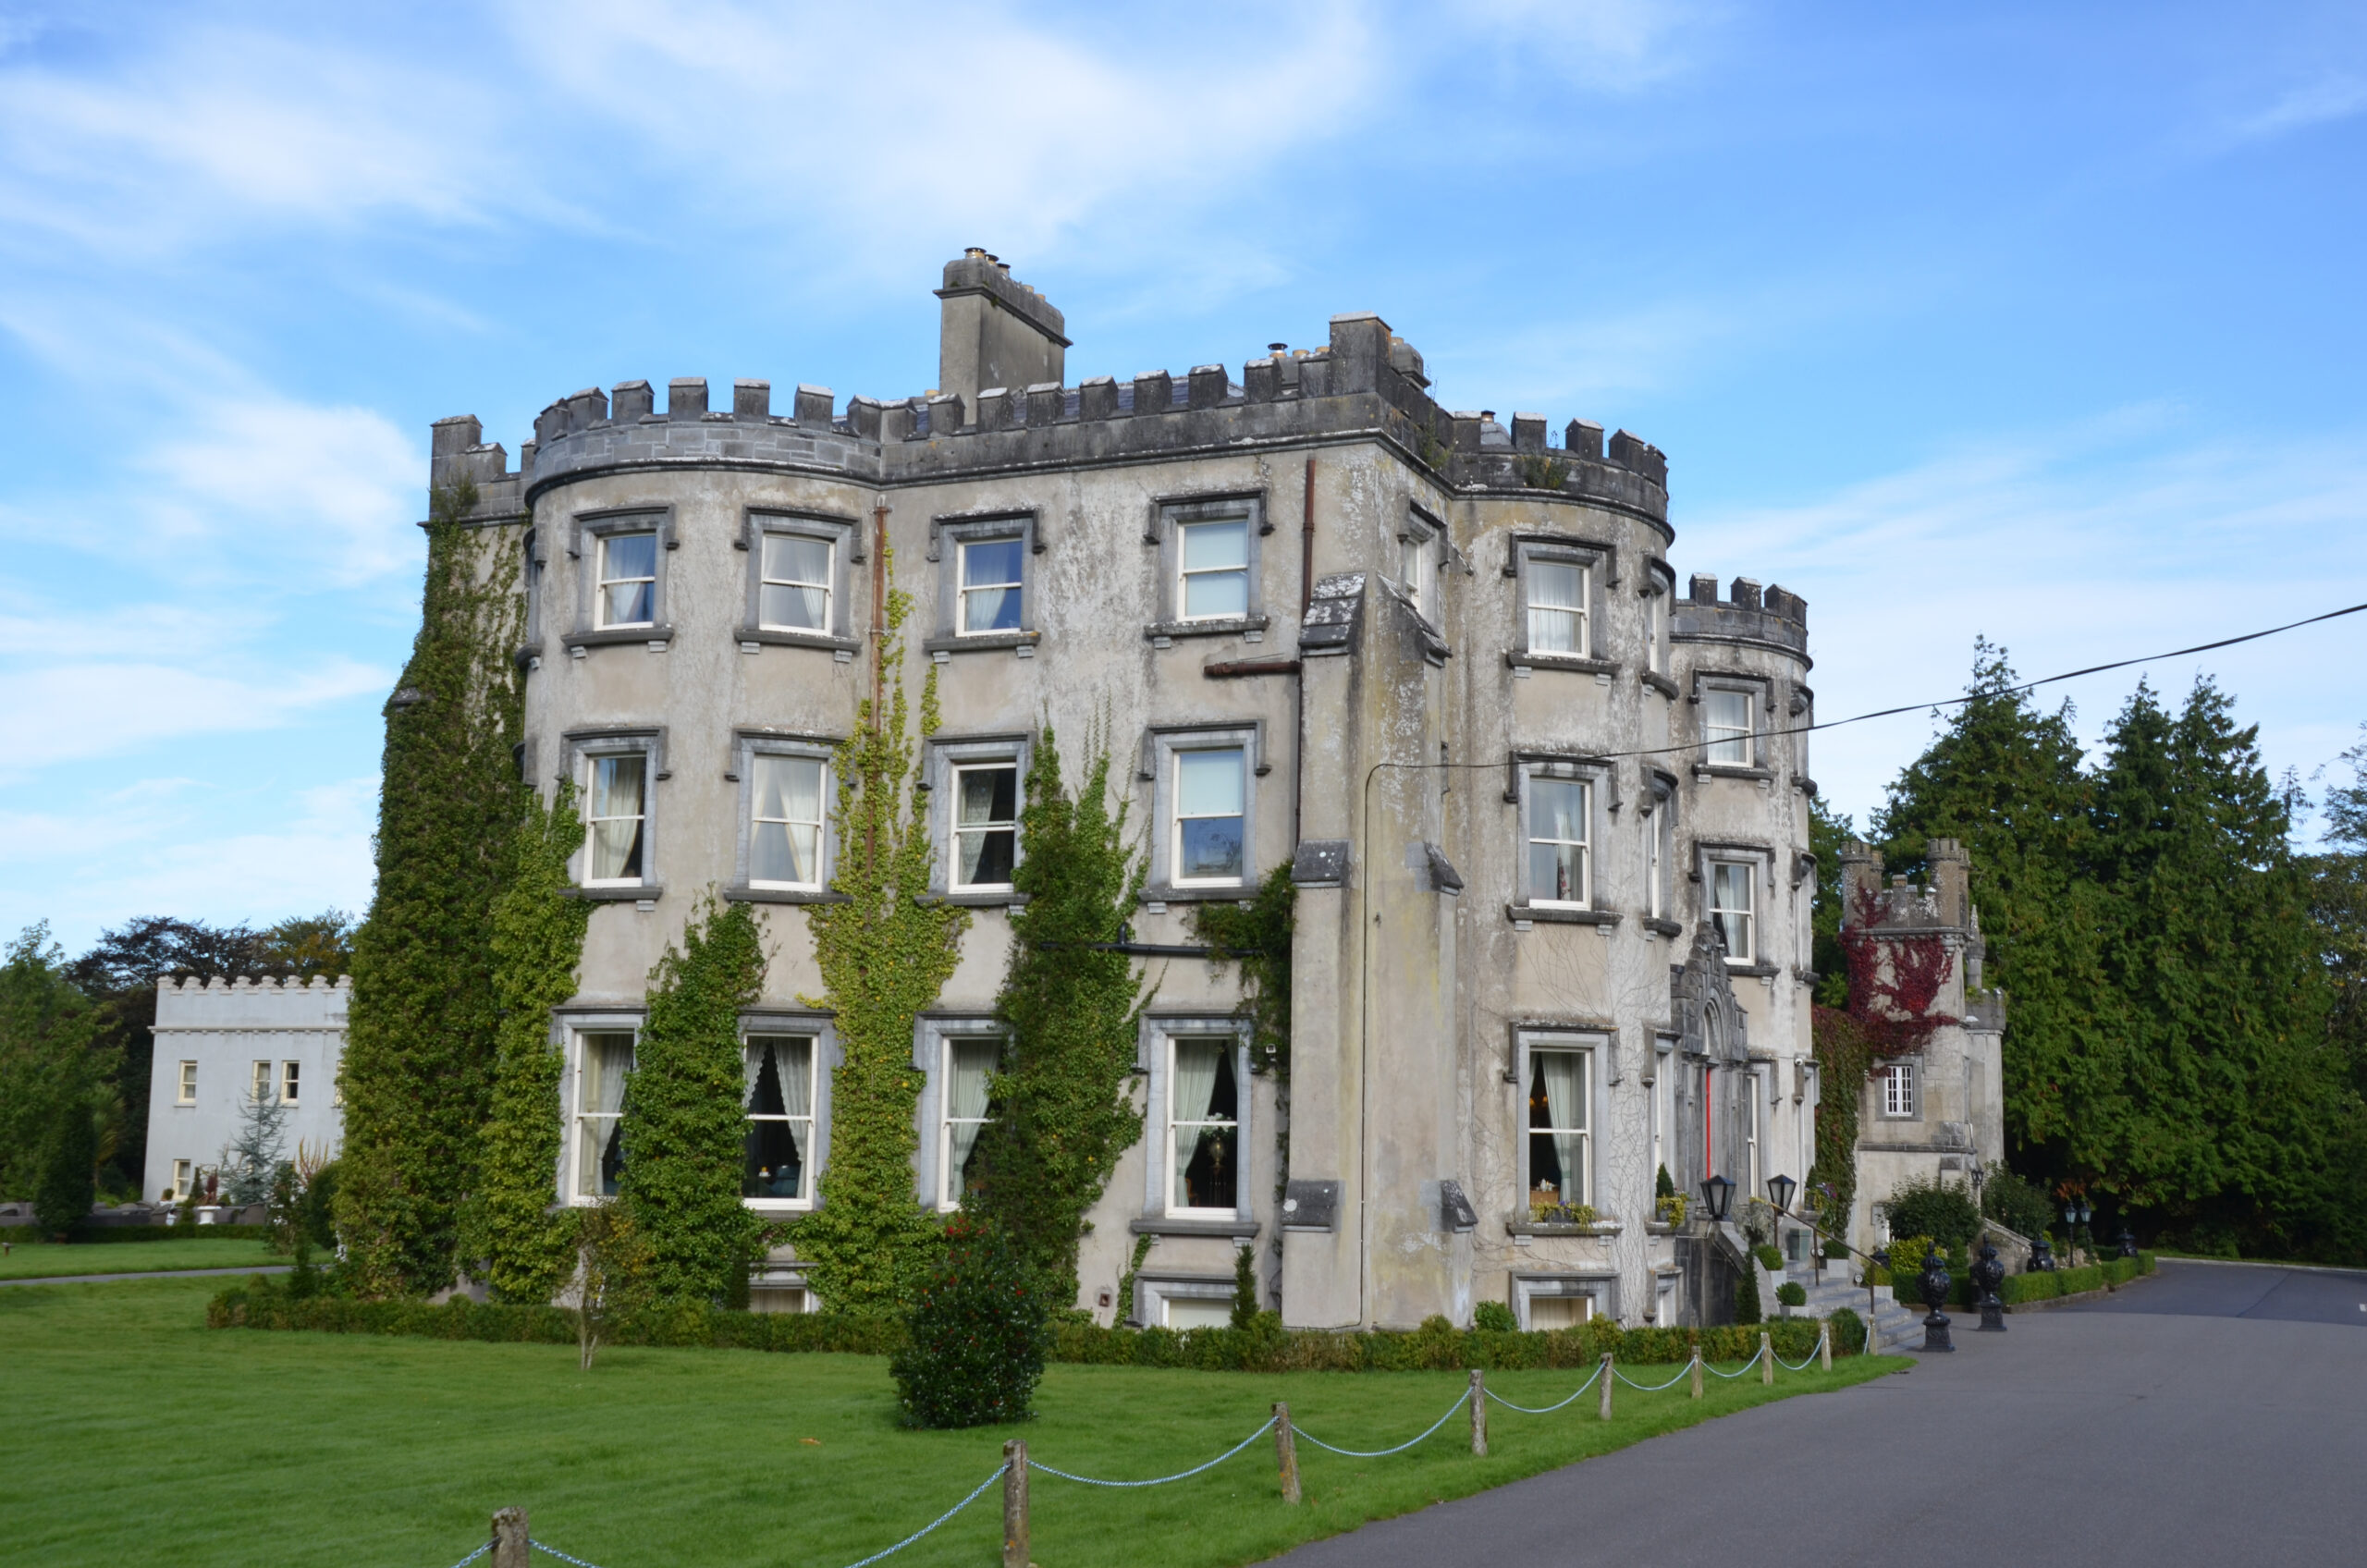 View of the romatic and Ivy covered Ballyseede Castle Hotel. This castle is smaller than many others on our list and has a cozy vibe. 